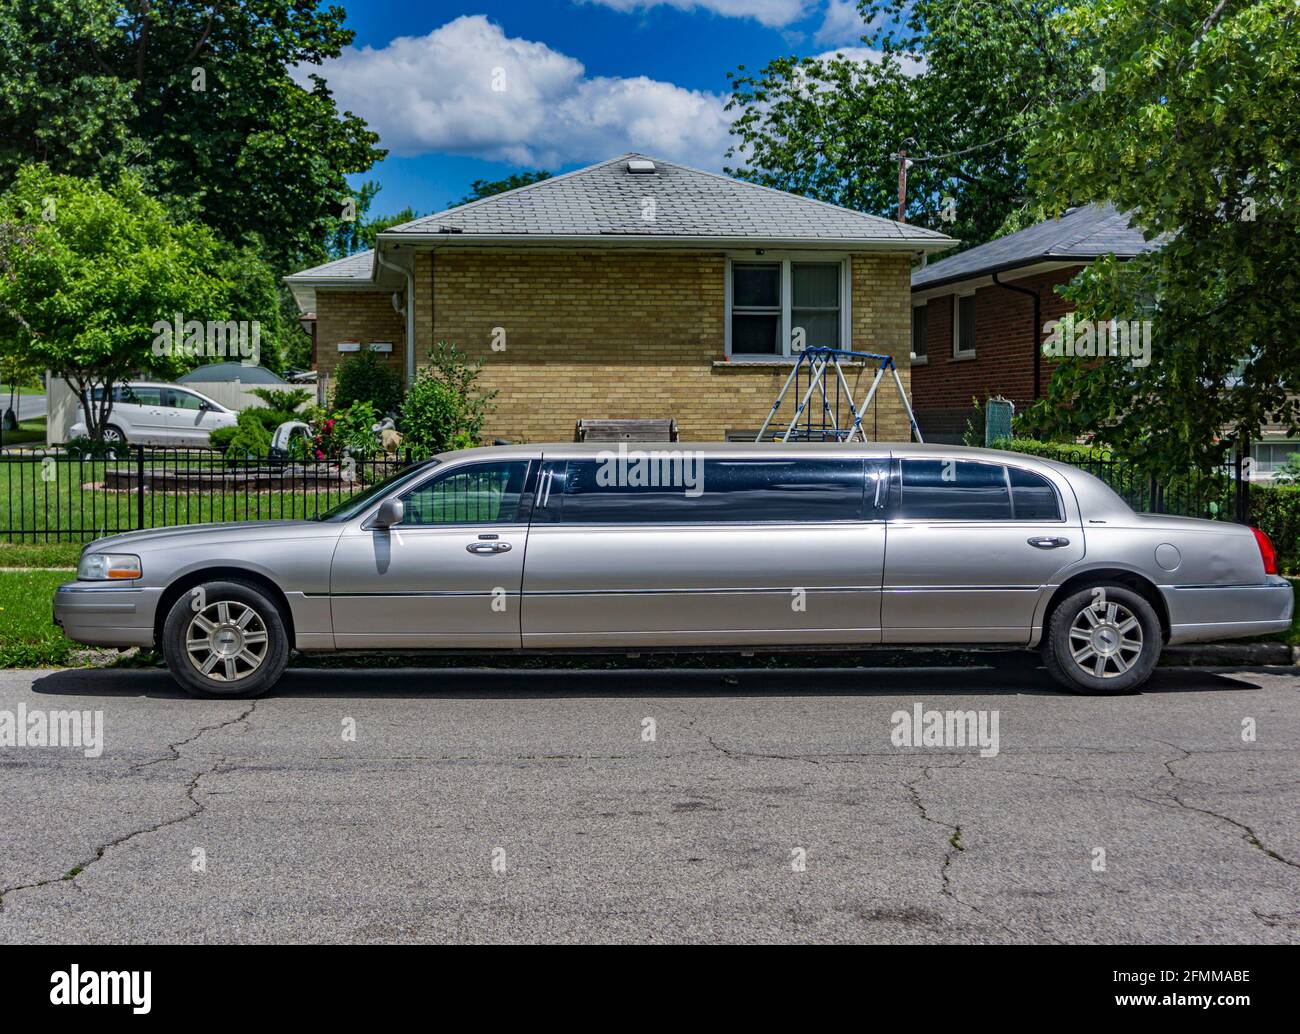 Silver colour stretch limousine parked by the sidewalk of a residential neighbourhood Stock Photo